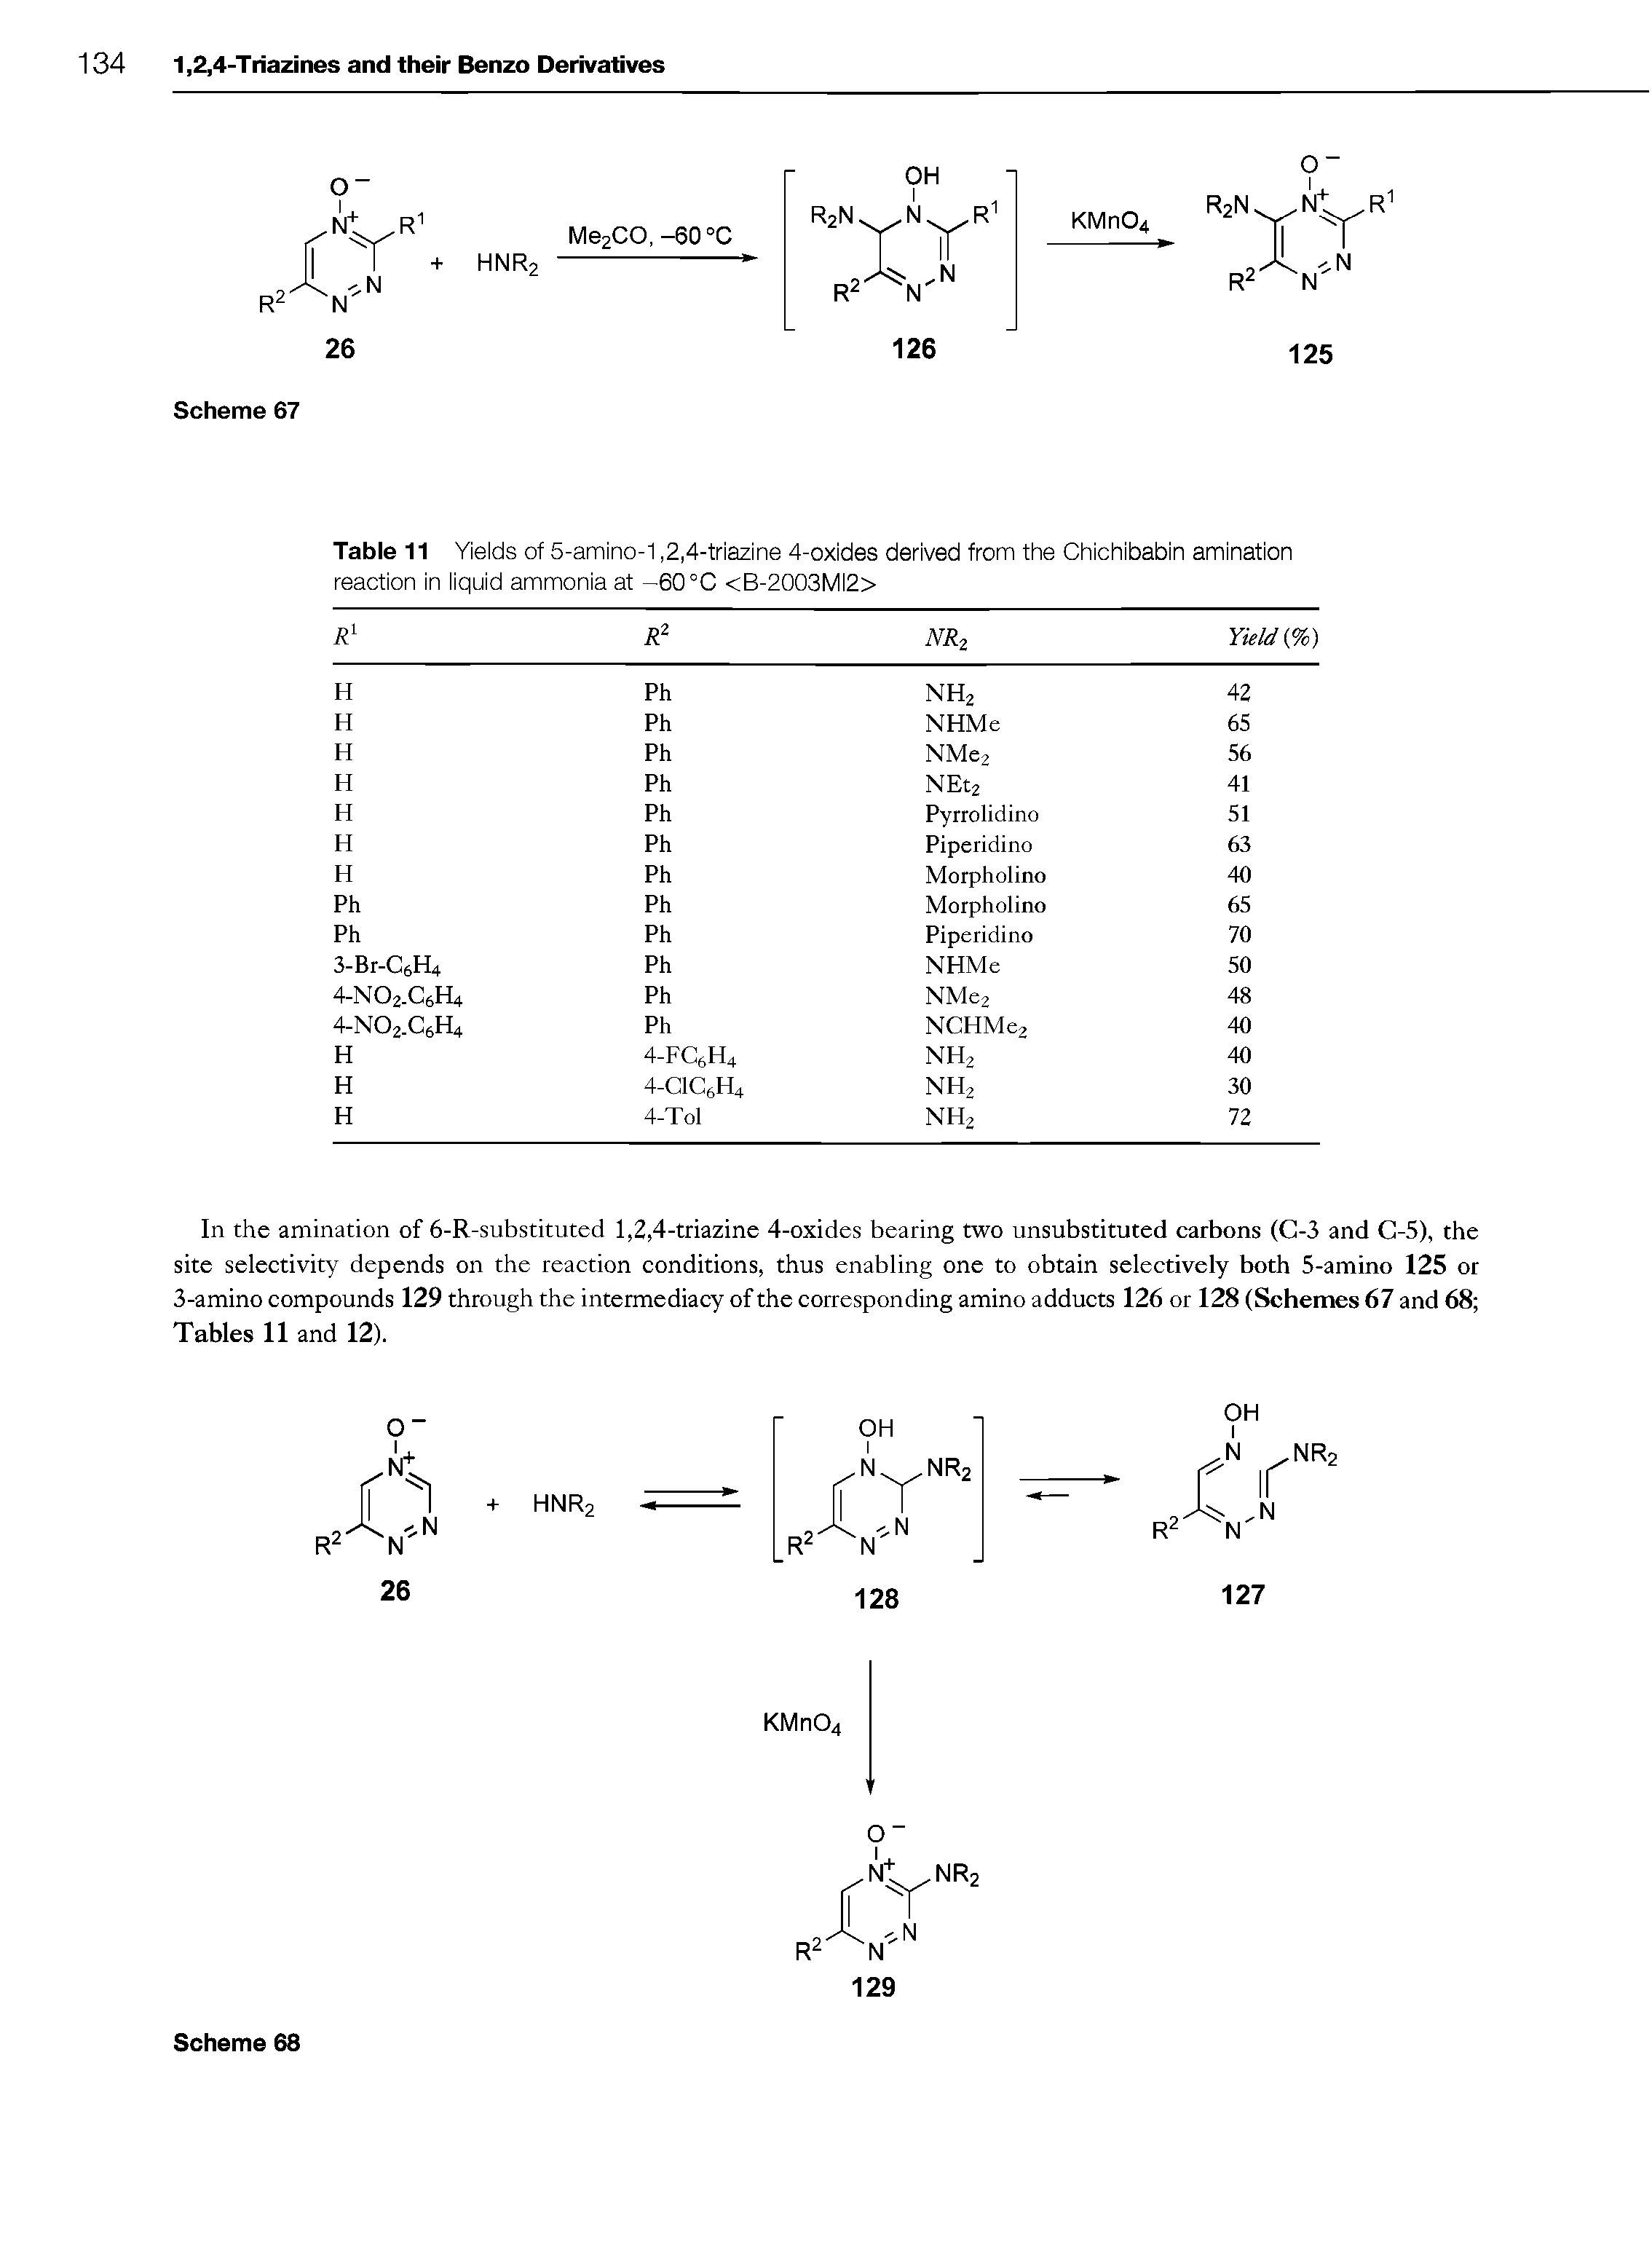 Table 11 Yields of 5-amino-1,2,4-triazine 4-oxides derived from the Chiohibabin amination reaotion in liquid ammonia at -60 °C <B-2003MI2>...